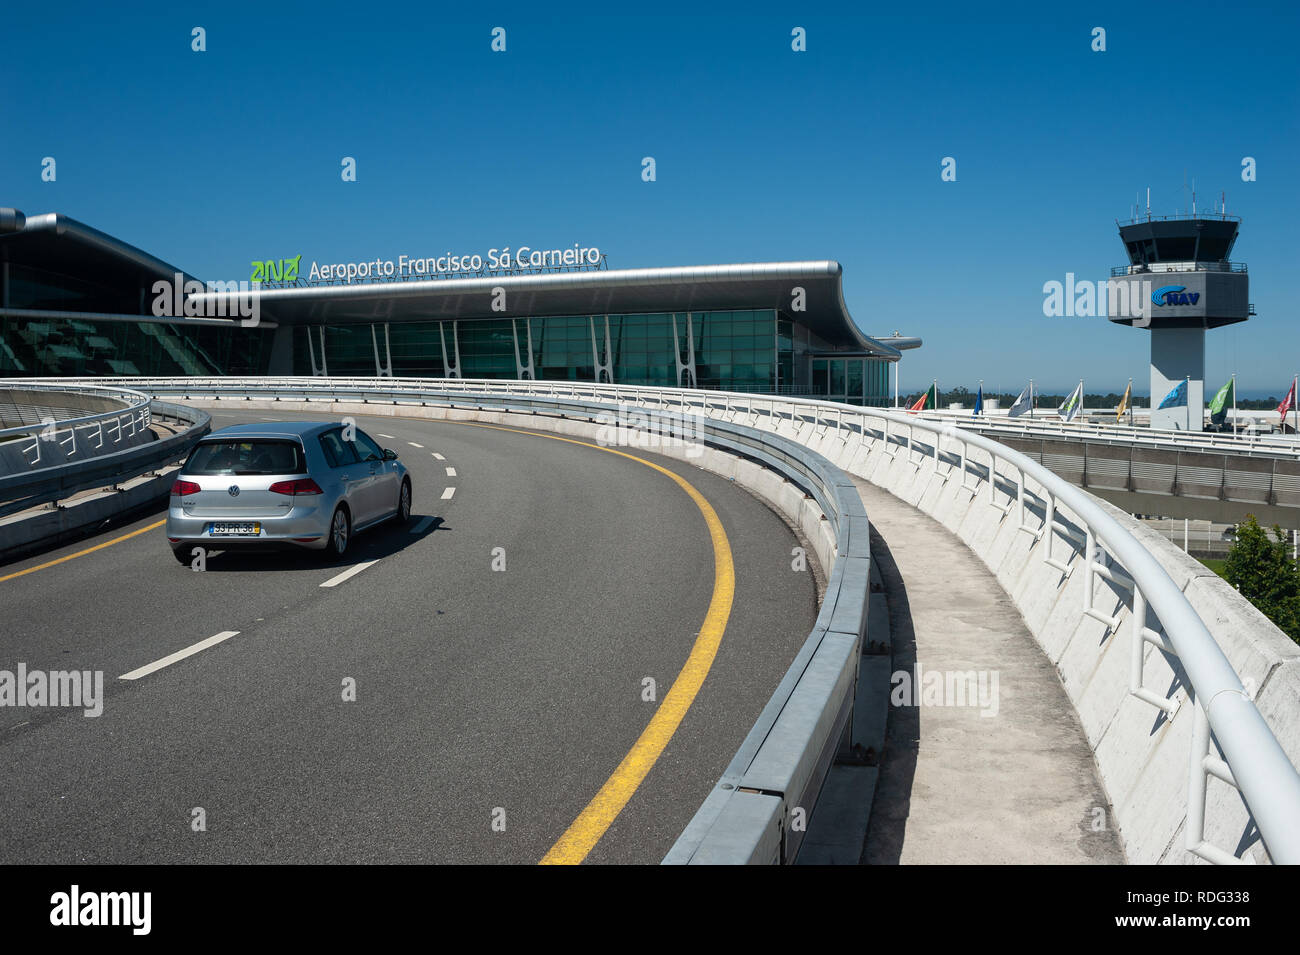 16.06.2018, Porto, Portugal, Europe - View of access road, terminal and tower at Porto's international airport Francisco Sa Carneiro. Stock Photo